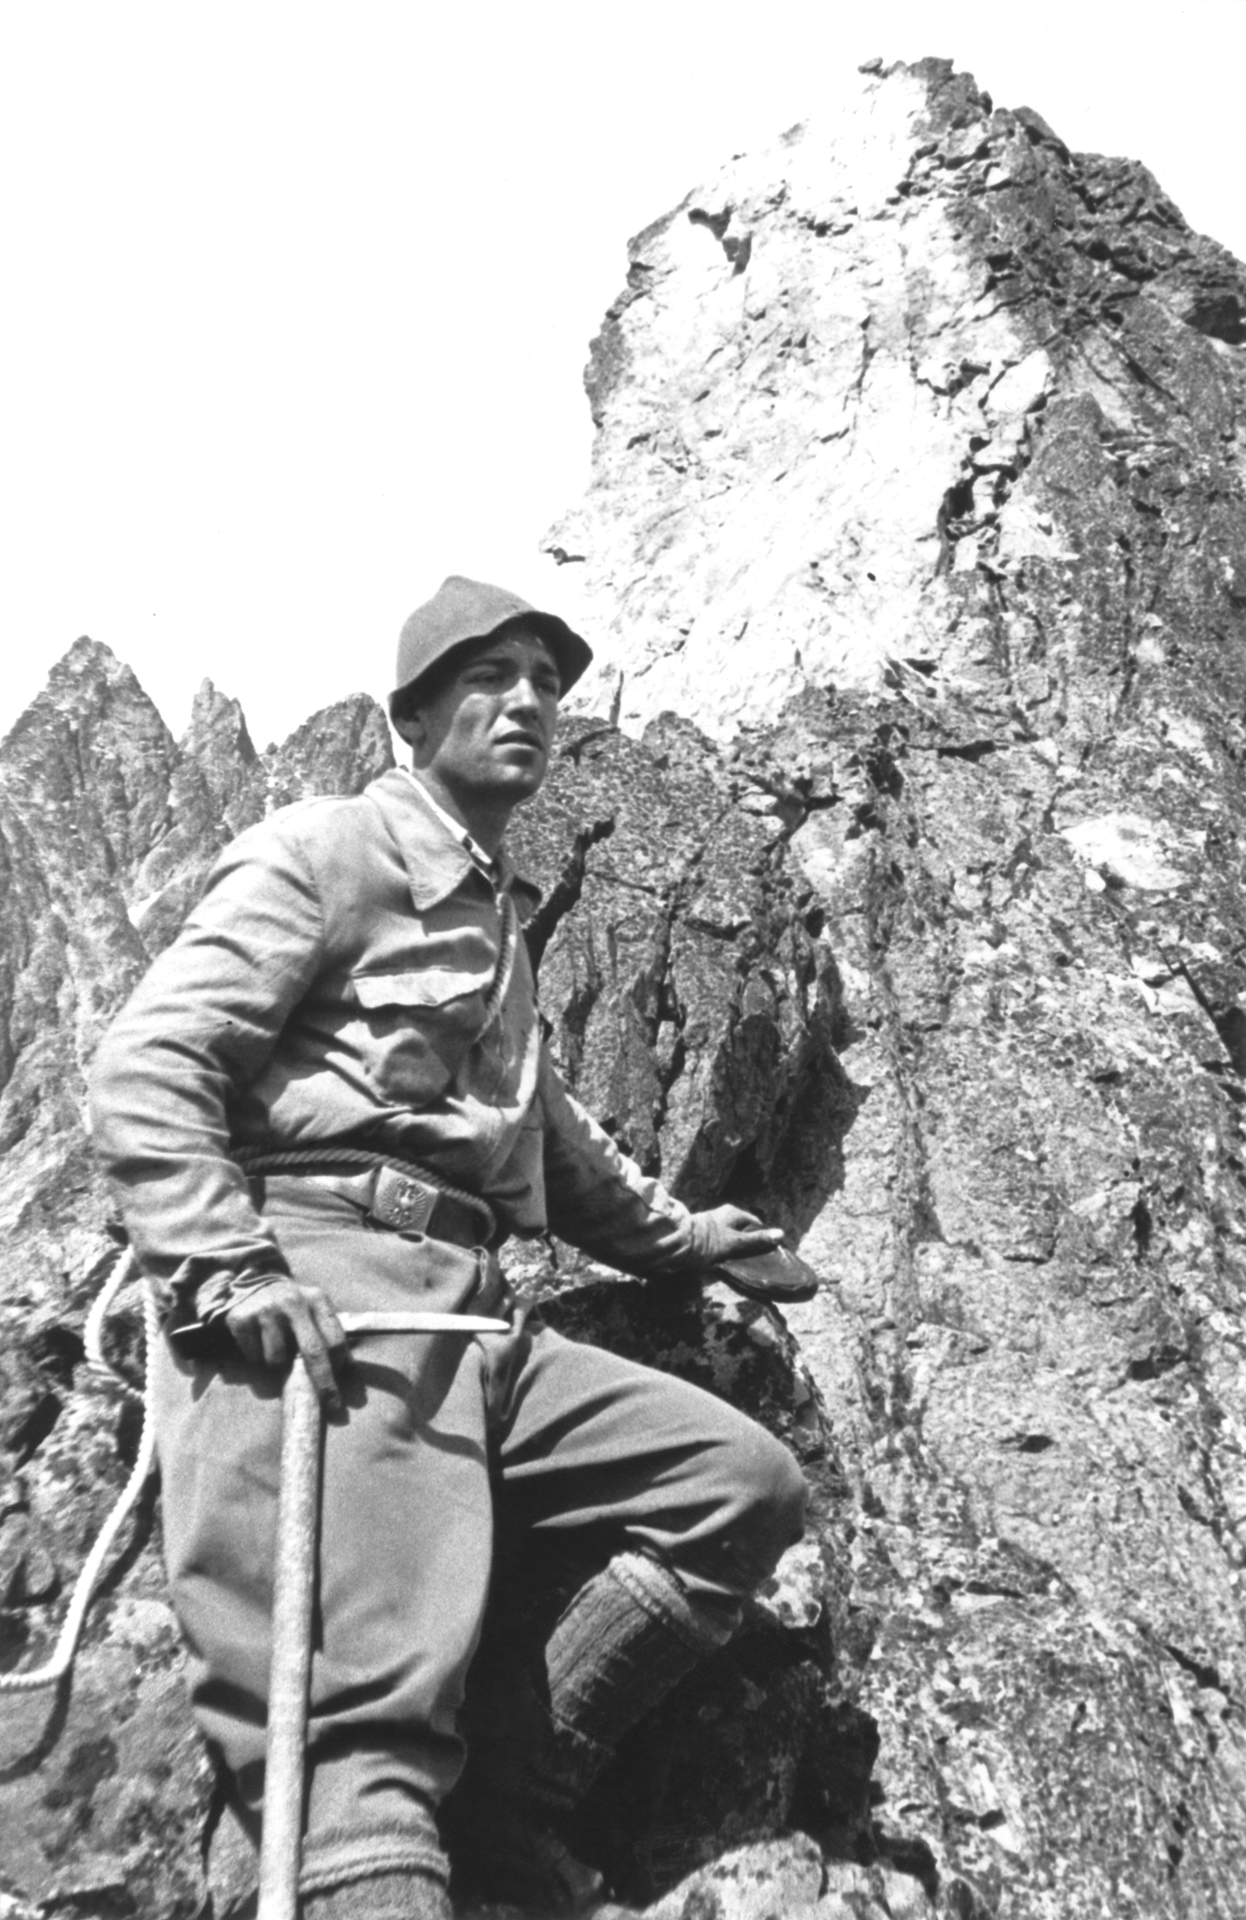 On display is a black and white photograph showing Bruno Martinazzi climbing a mountain peak. The artist is wearing a hat and linen clothes and is holding a chisel in his hand.